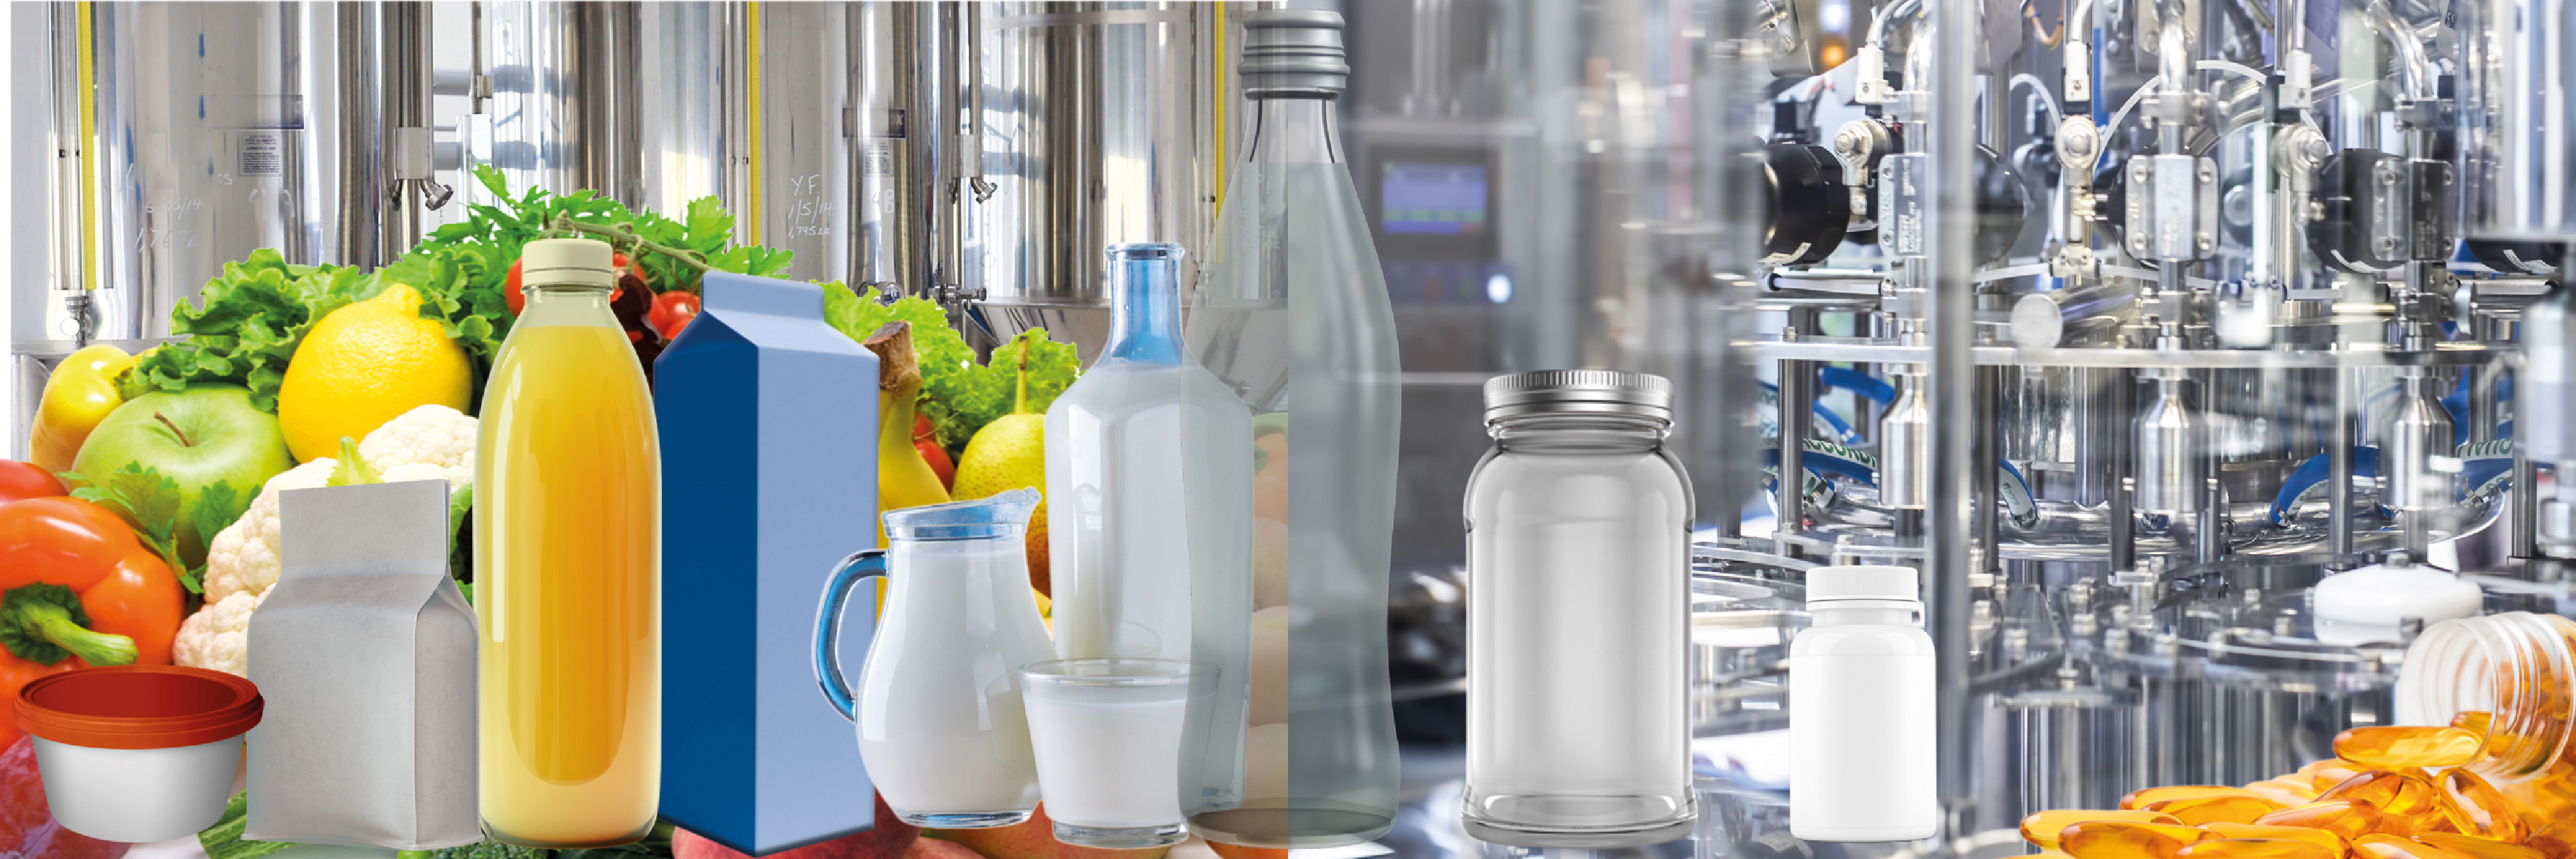 Sensor solutions for the food and pharmaceutical industries 